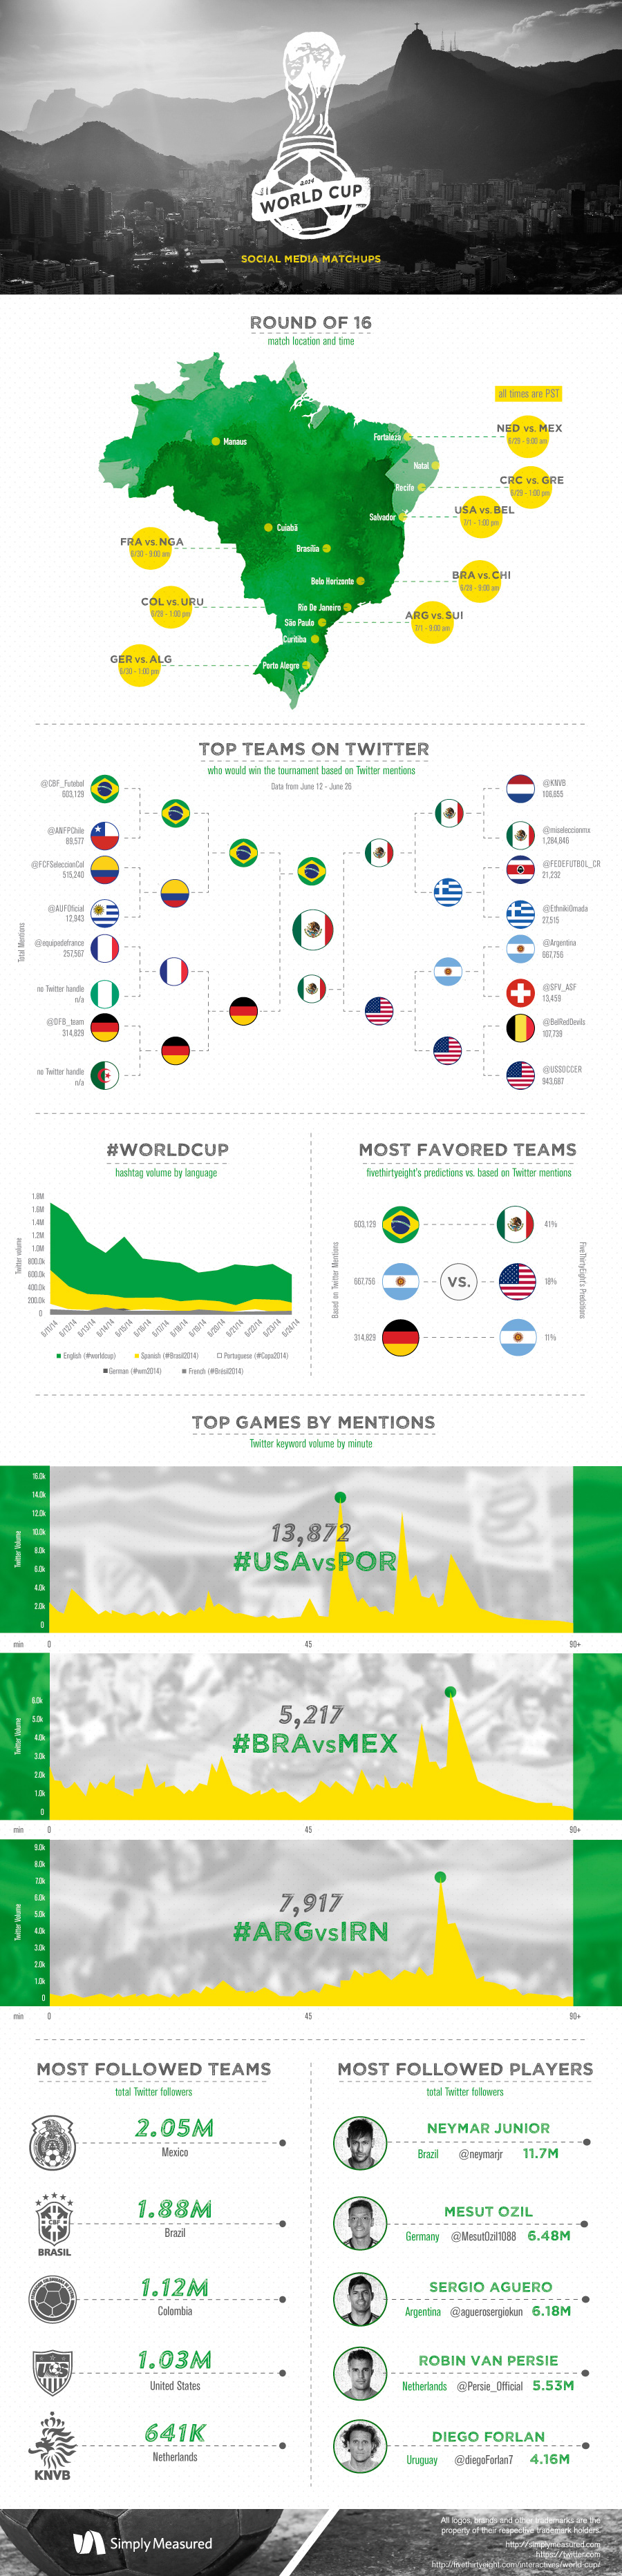 infographic worldcup2014 WorldCup design graphicdesign sociamedia twitter